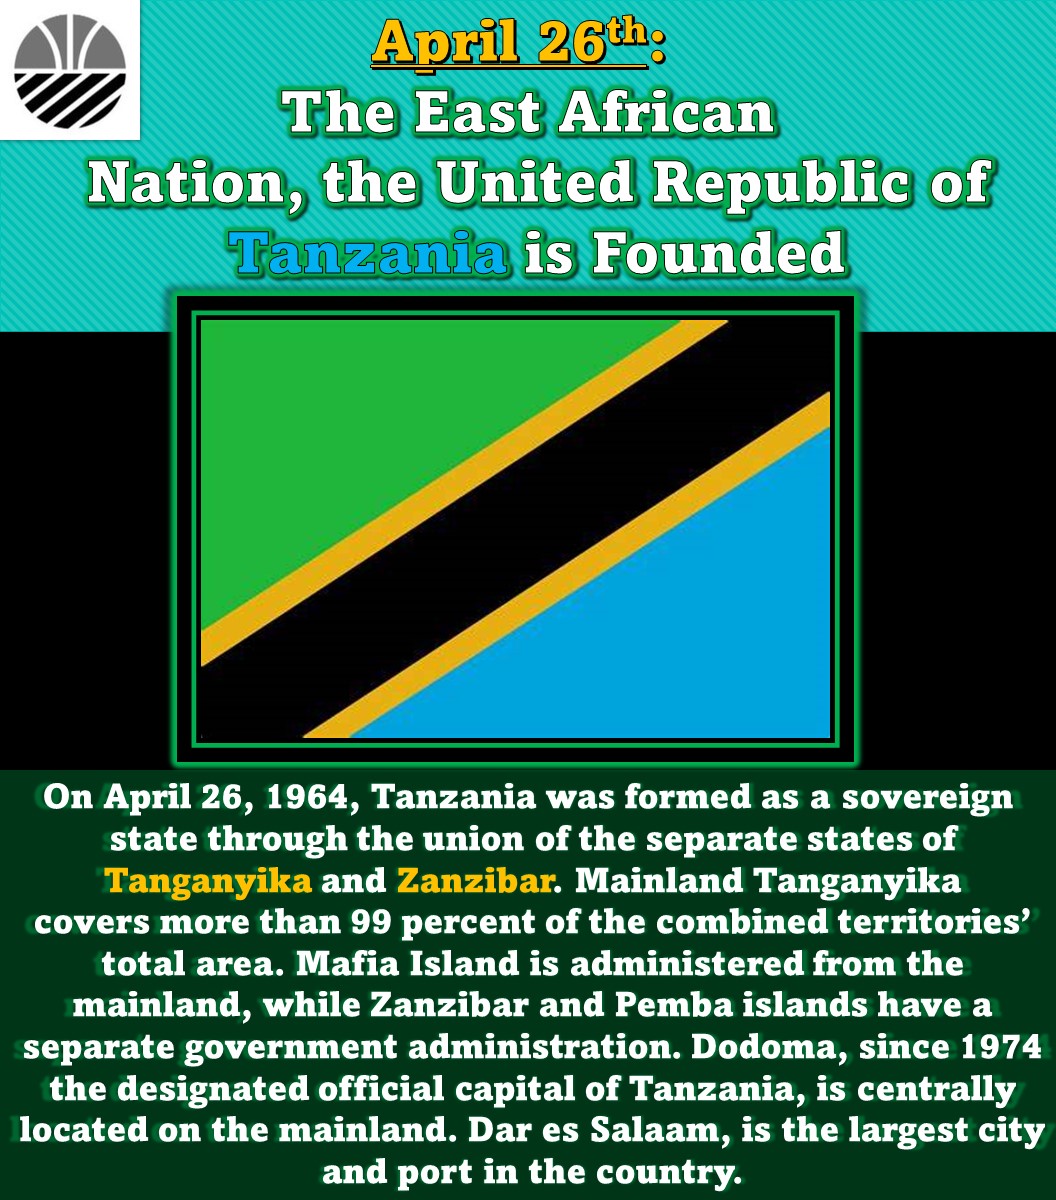 #Tanzania was formed as a sovereign state in 1964 through the union of #Tanganyika & #Zanzibar. The nation was led by Pres. #JuliusNyerere until 1985. Experiencing both political & #economicstruggles, it held its 1st multiparty elections in 1995. #PHIZ #PHIZNews #Africa #history